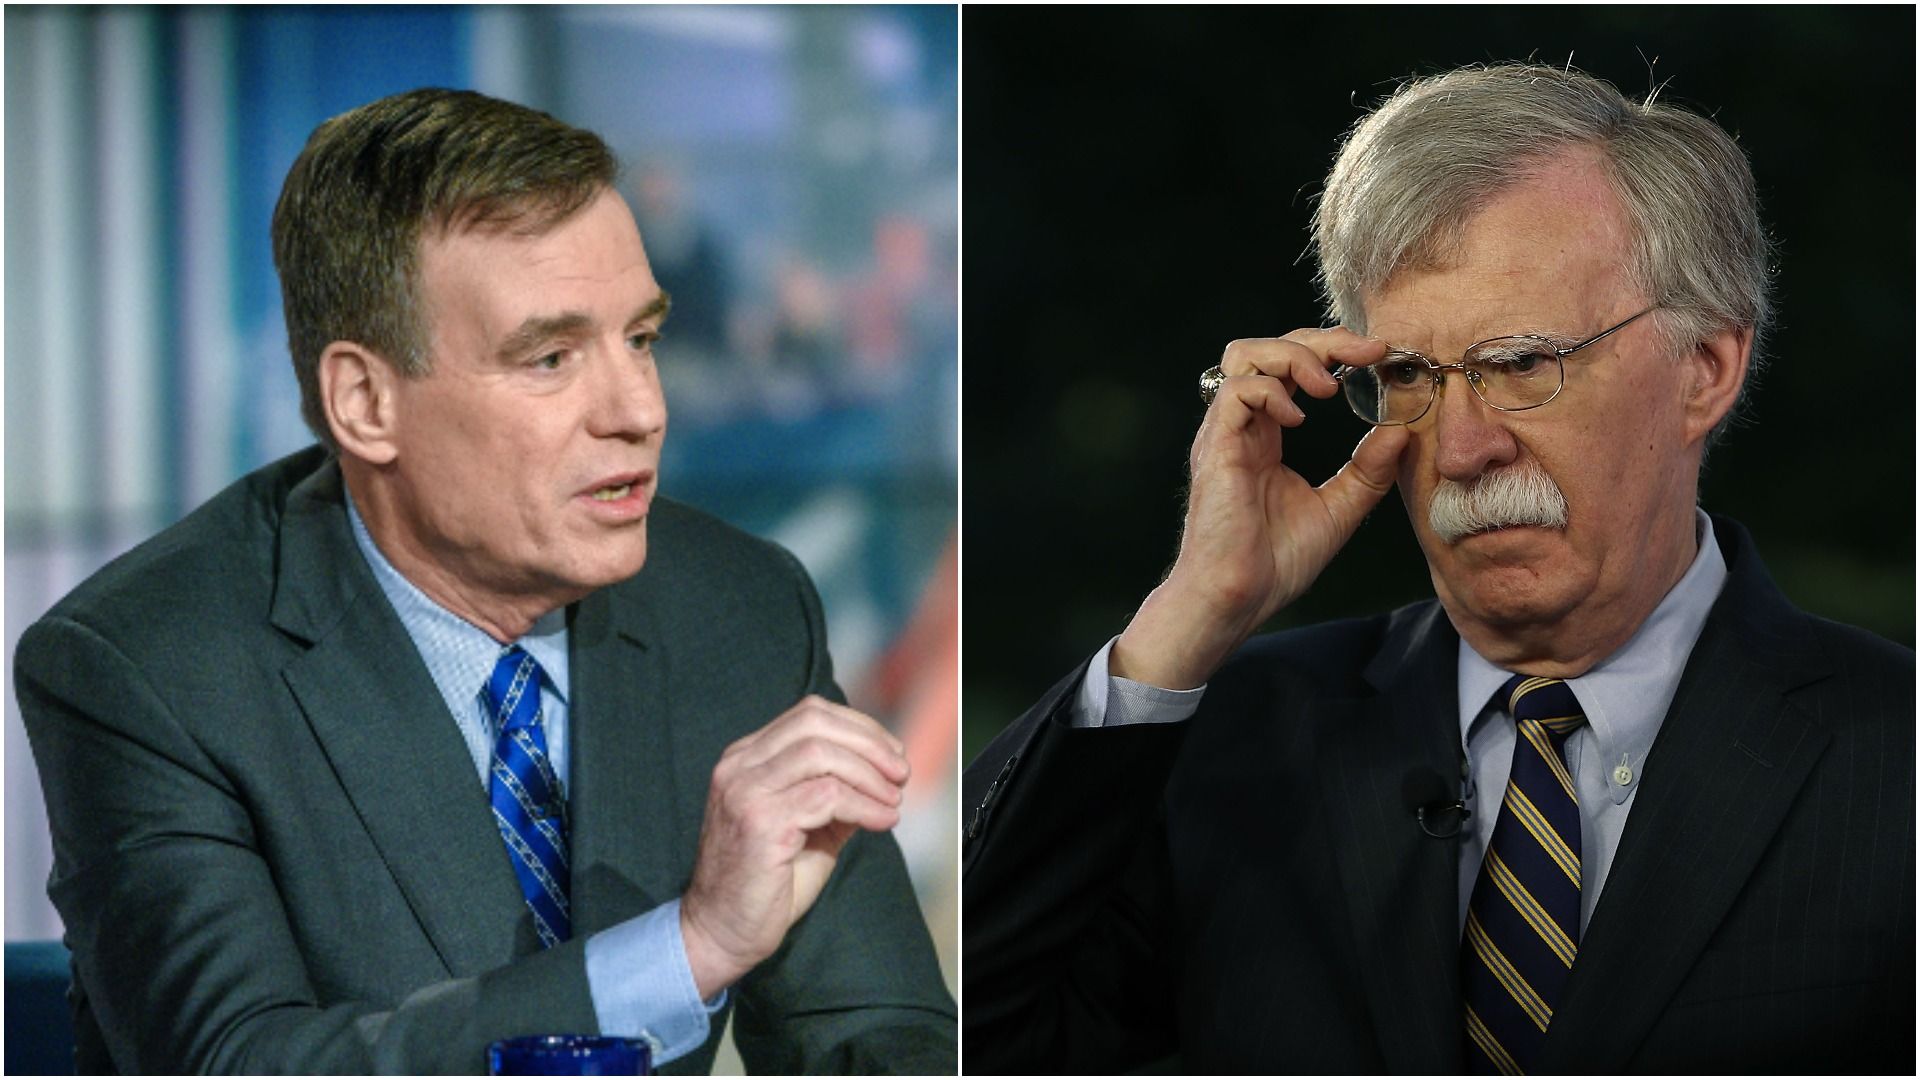 Warner and Bolton face each other in a photo collage